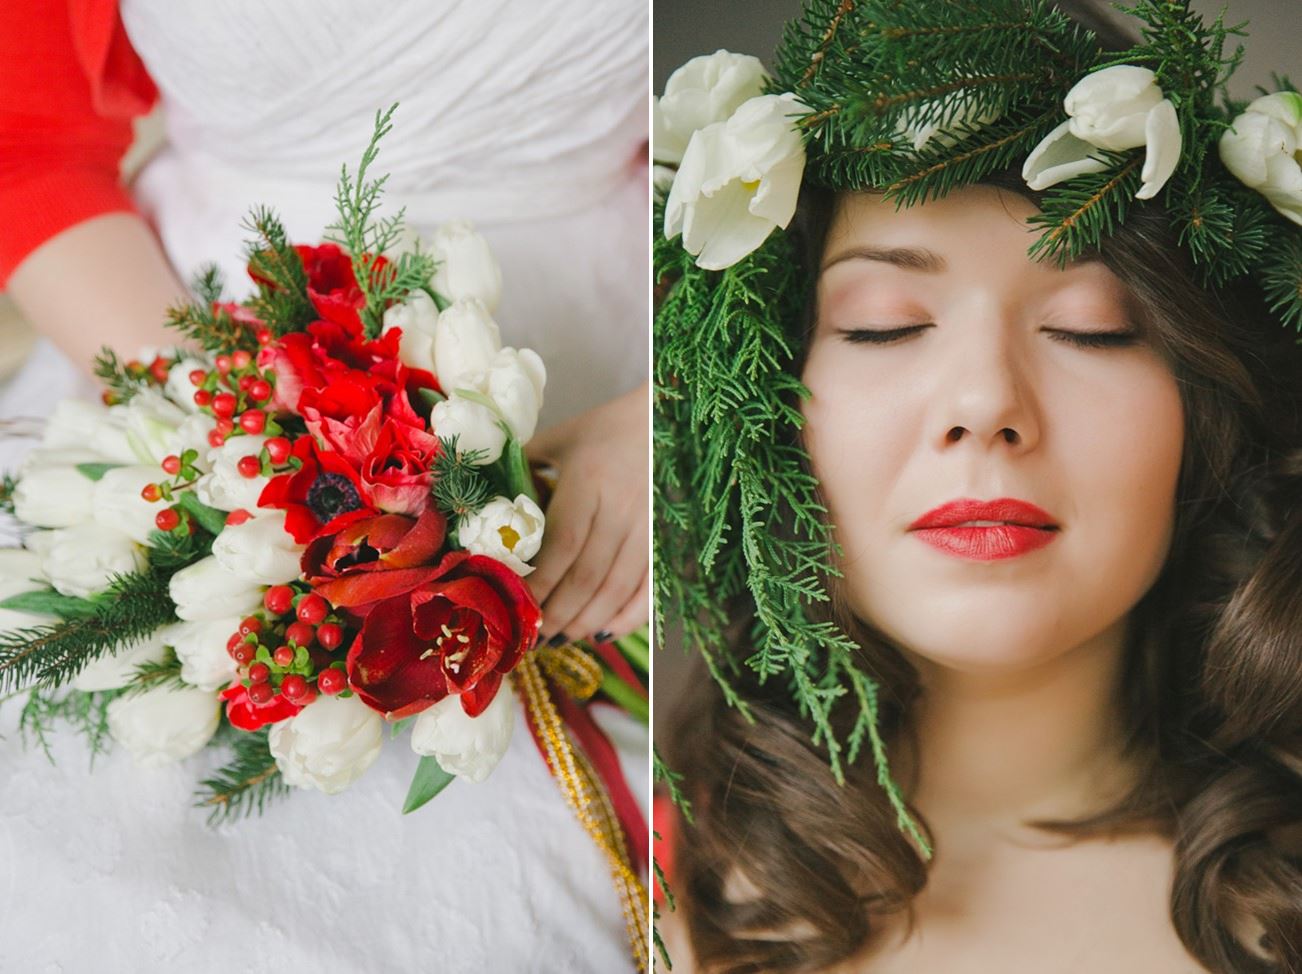 Christmas Wedding Bouquet & Flower Crown - A Cosy Winter Wedding Inspiration Shoot in Red, Green & White from WarmPhoto